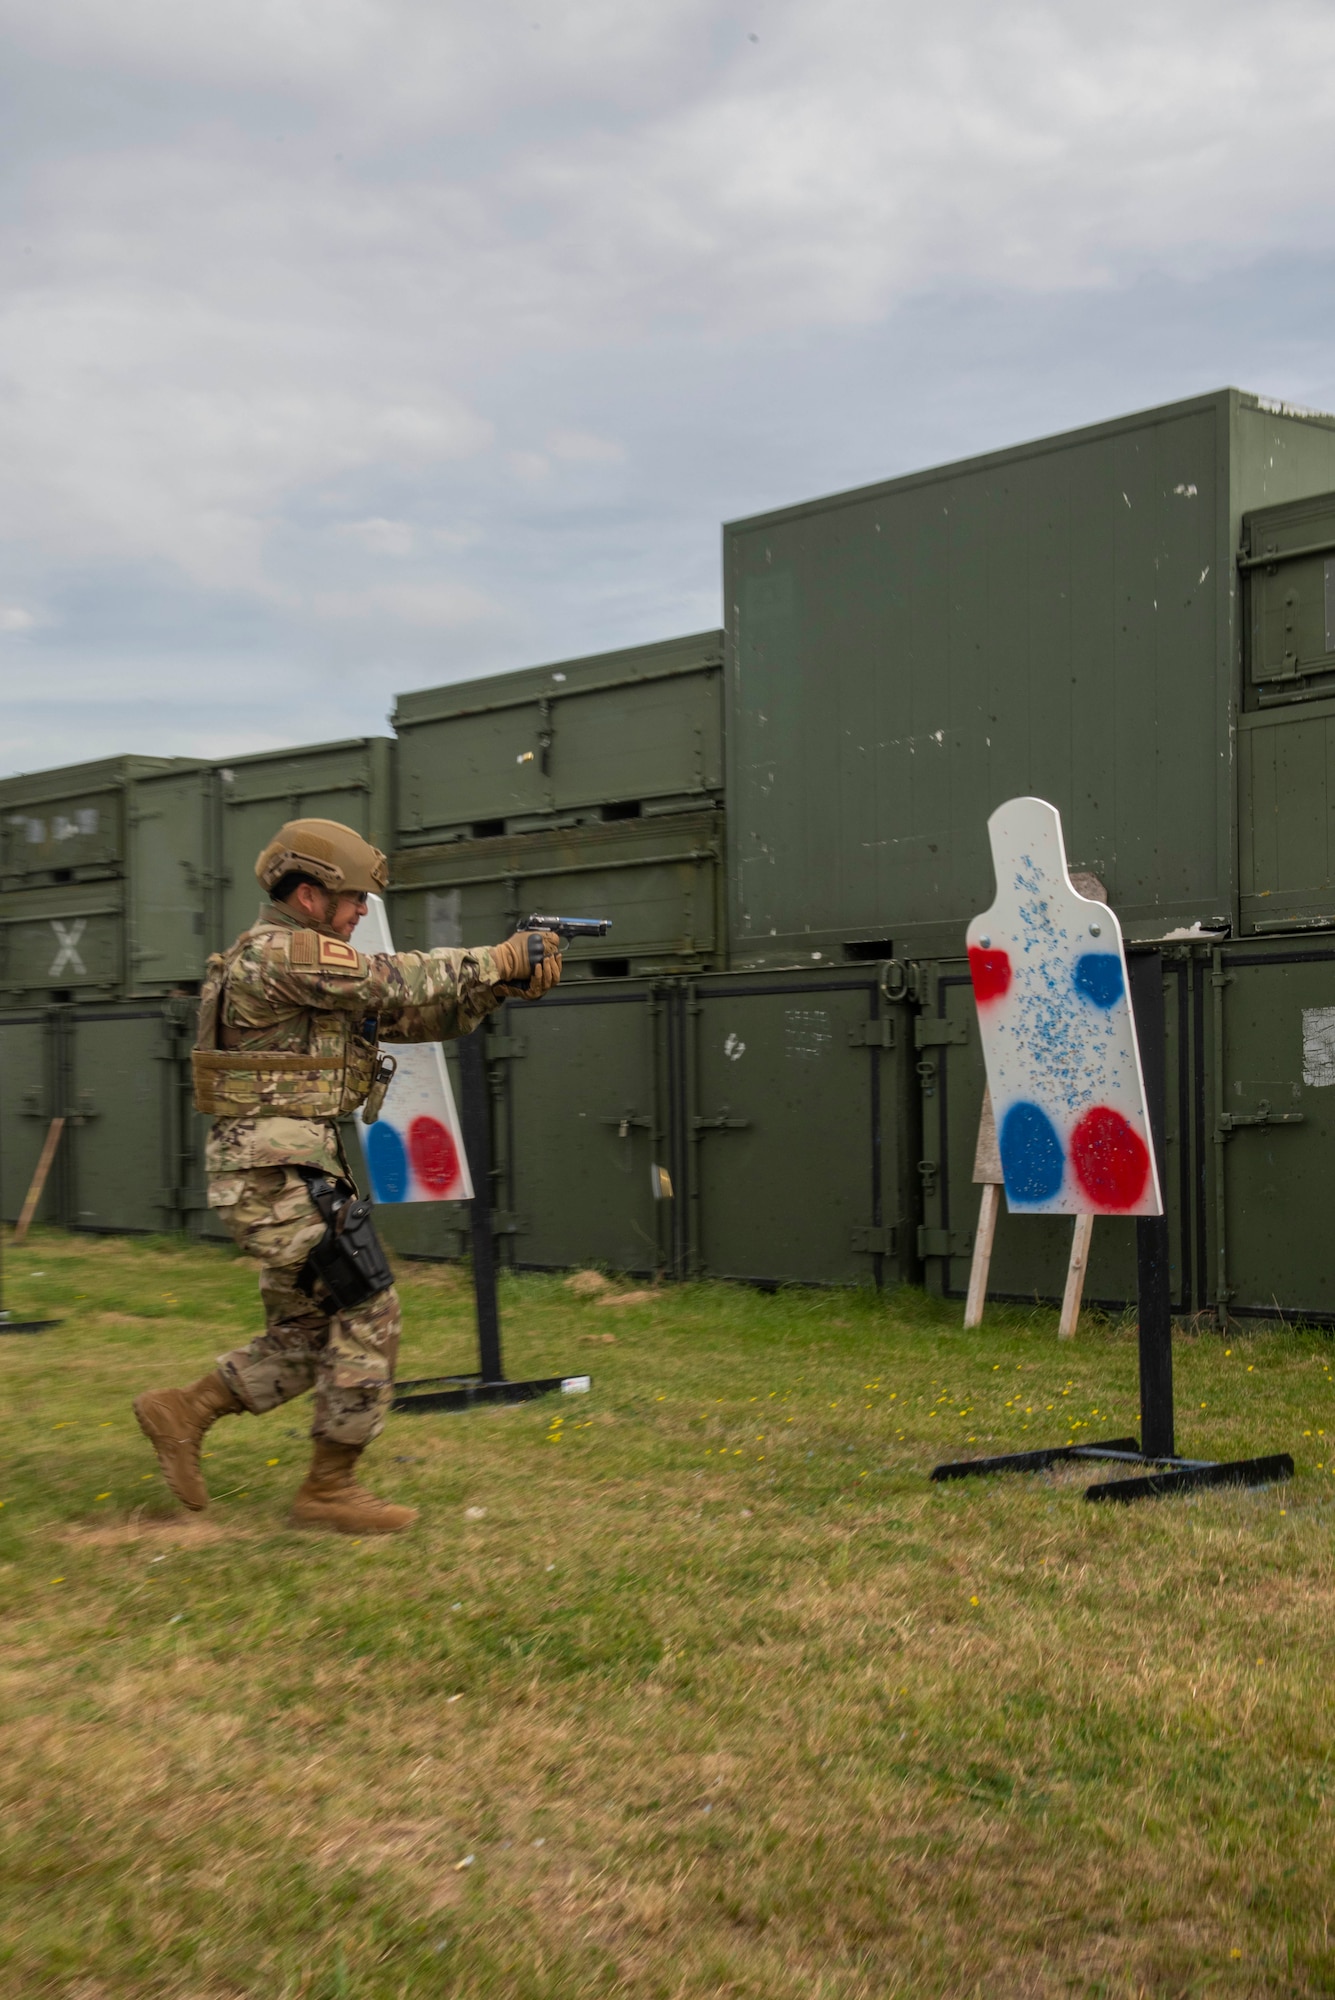 Col. Troy Pananon, 100th Air Refueling Wing commander shoots an M9 pistol during shoot, move and communicate training with Airmen from the 100th Security Forces Squadron at RAF Mildenhall, England, Aug. 30, 2019. Airmen from 100th SFS are RAF Mildenhall’s first line of defense against any adversary and are highly trained law enforcement and they are combat arms specialists prepared to protect and serve their fellow Airmen around-the-clock. They have similar responsibilities as civilian officers, including responding to emergencies, directing traffic and investigating crimes on base. (U.S. Air Force photo by Senior Airman Luke Milano)